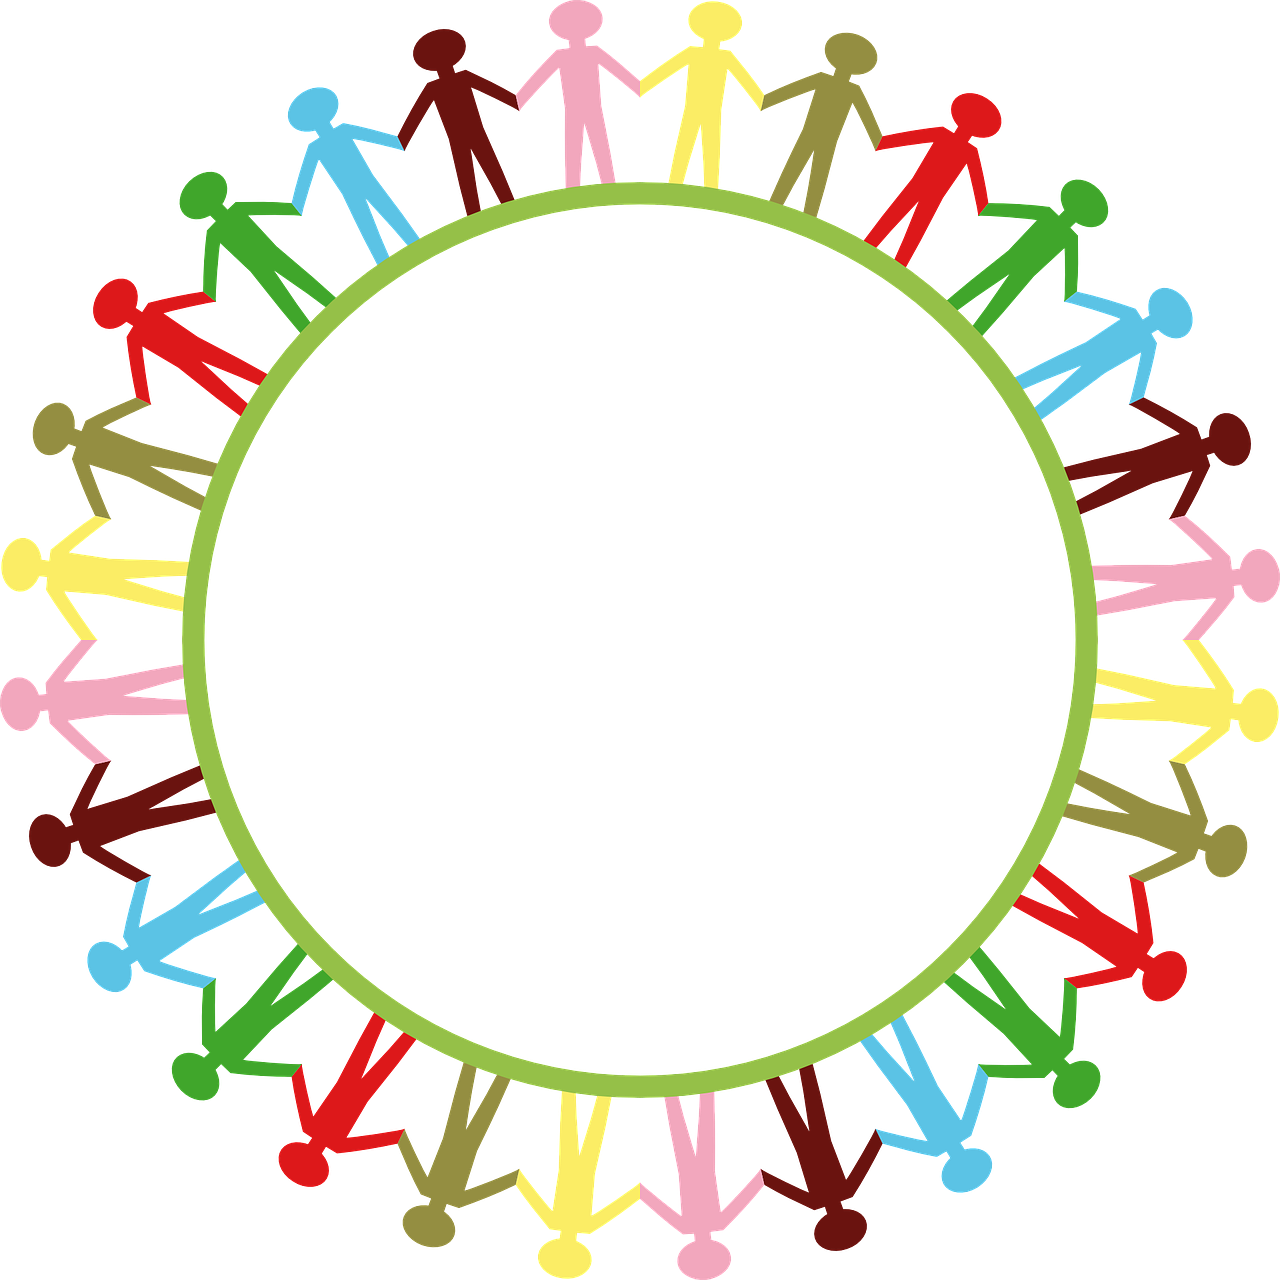 Calling All Writers And Artists - Circle Of People Holding Hands (1280x1280)